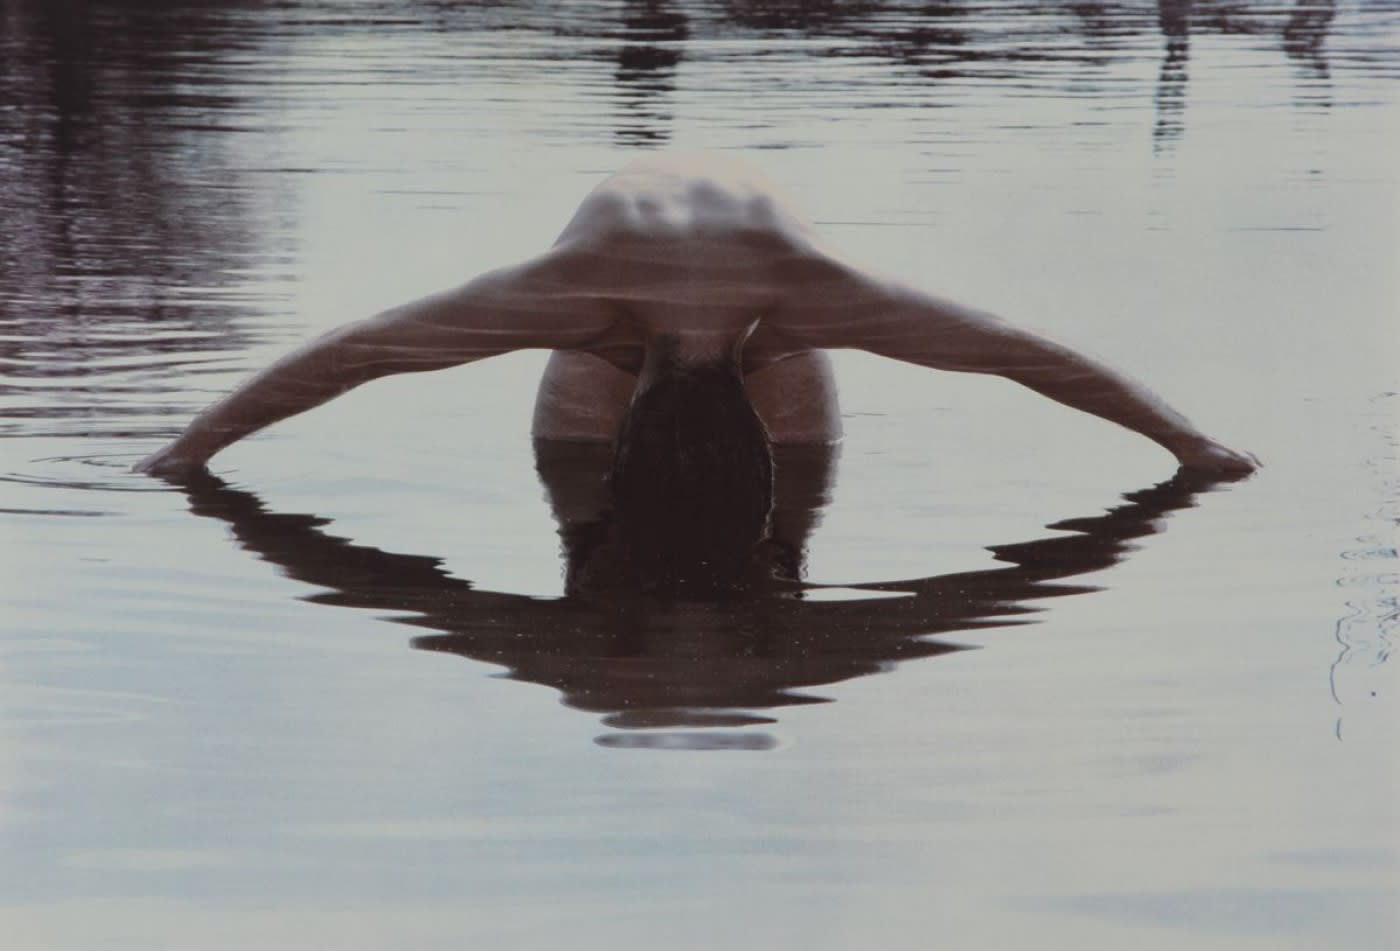 A woman dipping her hands in water whilst spread apart, with her body hunched together so the reflection mirrors her and creates an illusion of an eye